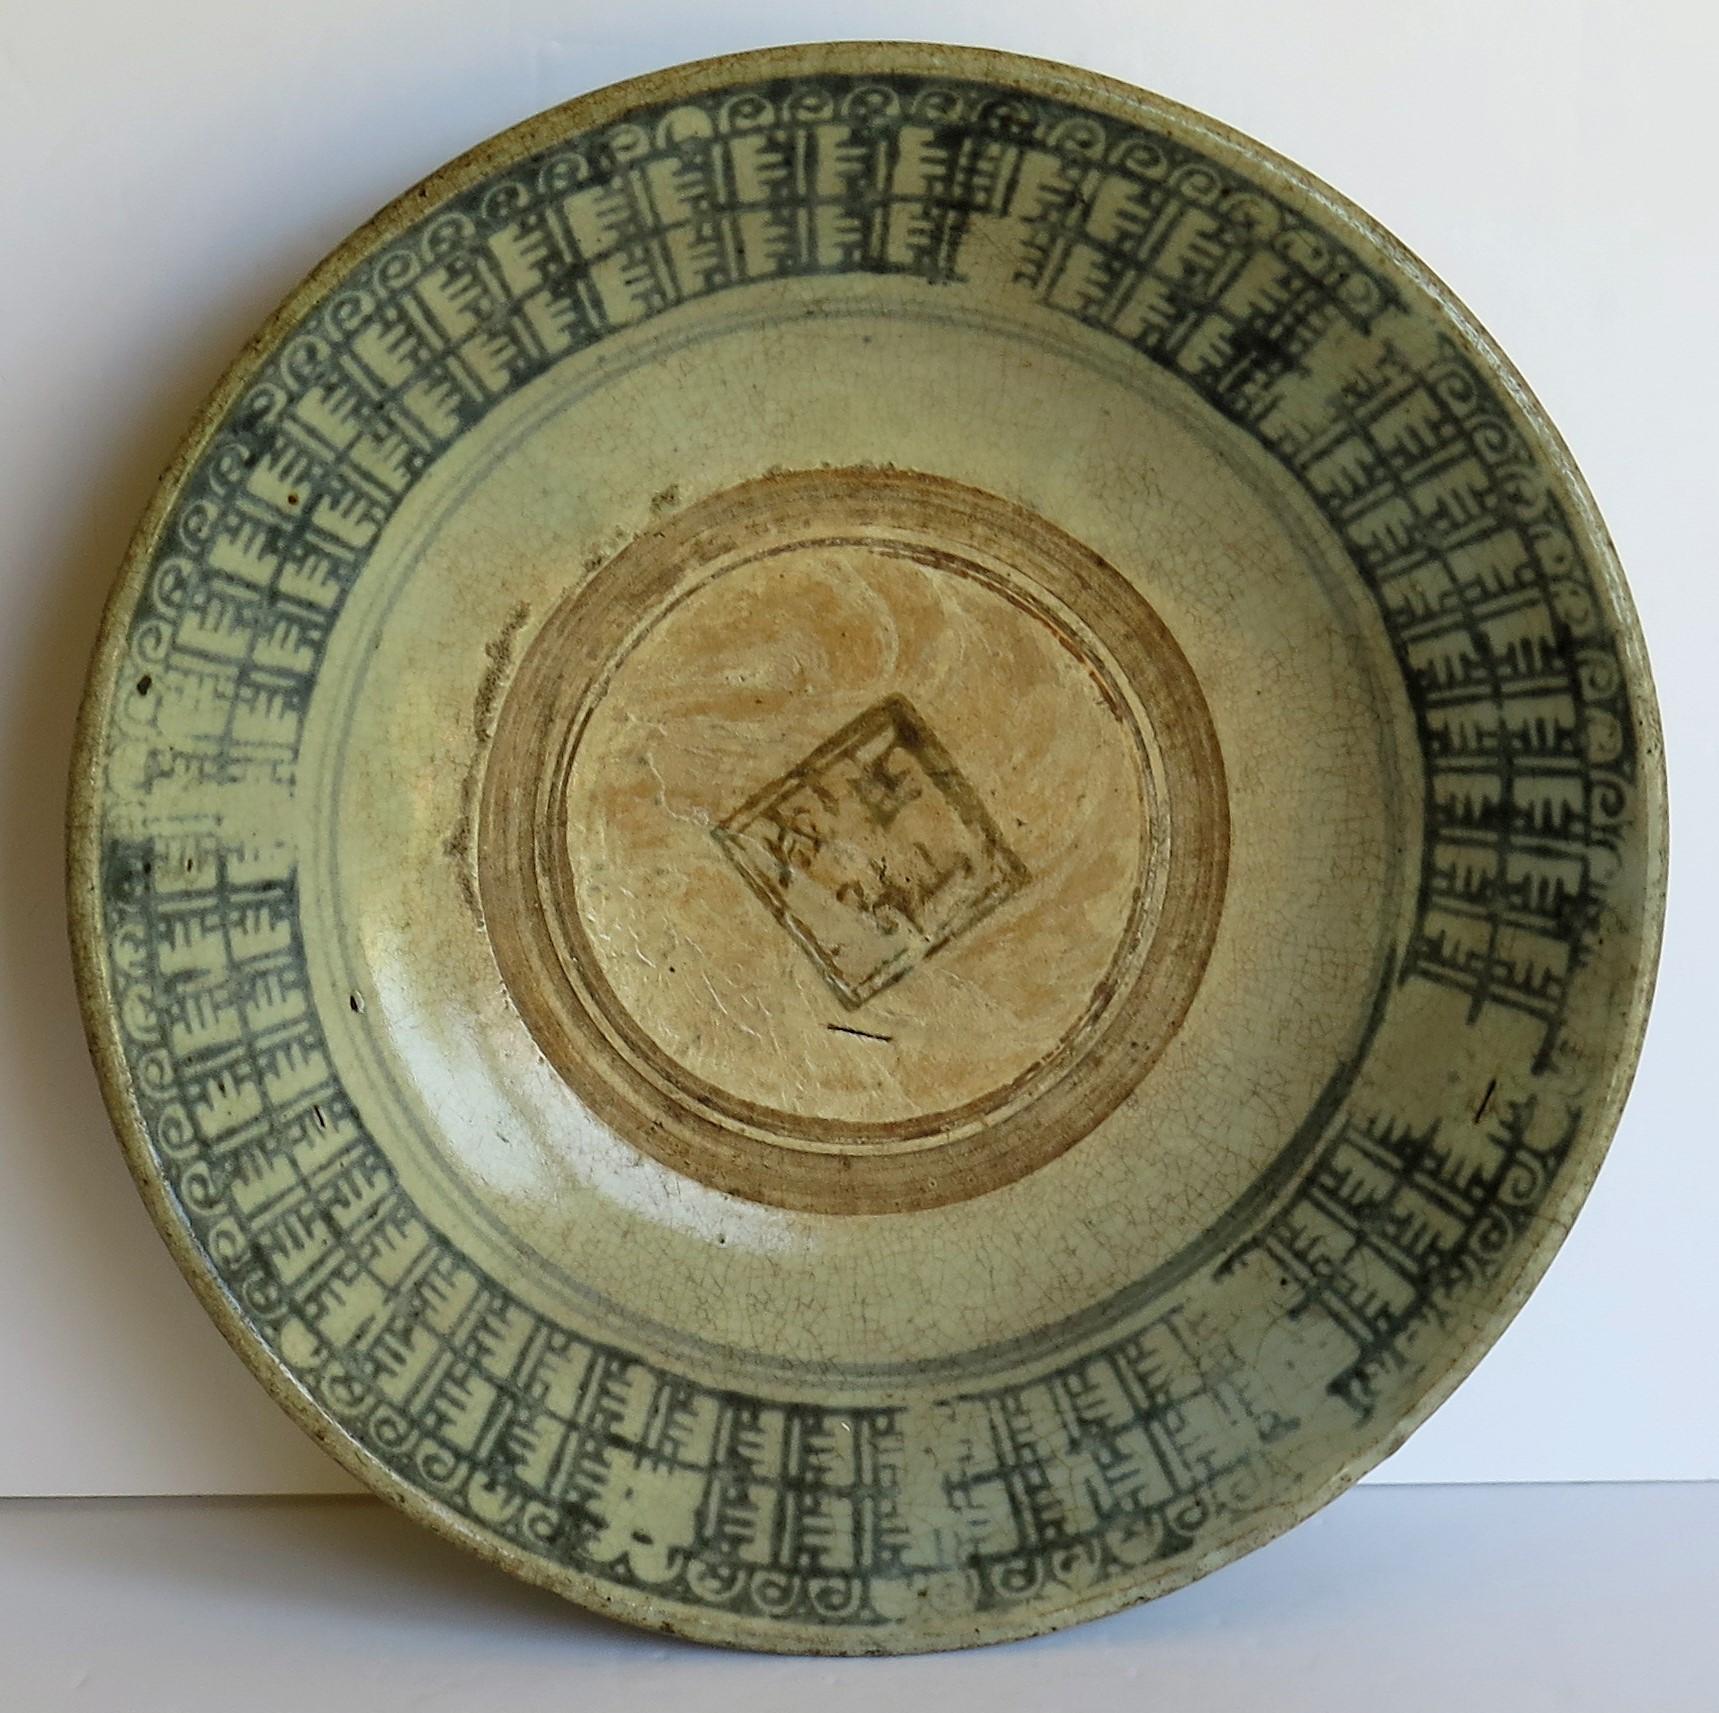 This is a Chinese ceramic bounty plate or bowl, handmade and decorated in cobalt blue which we date to the Ming Period, late 16th century or possibly earlier, back to the 14th century.

The deep plate or bowl is strongly hand potted on a low foot